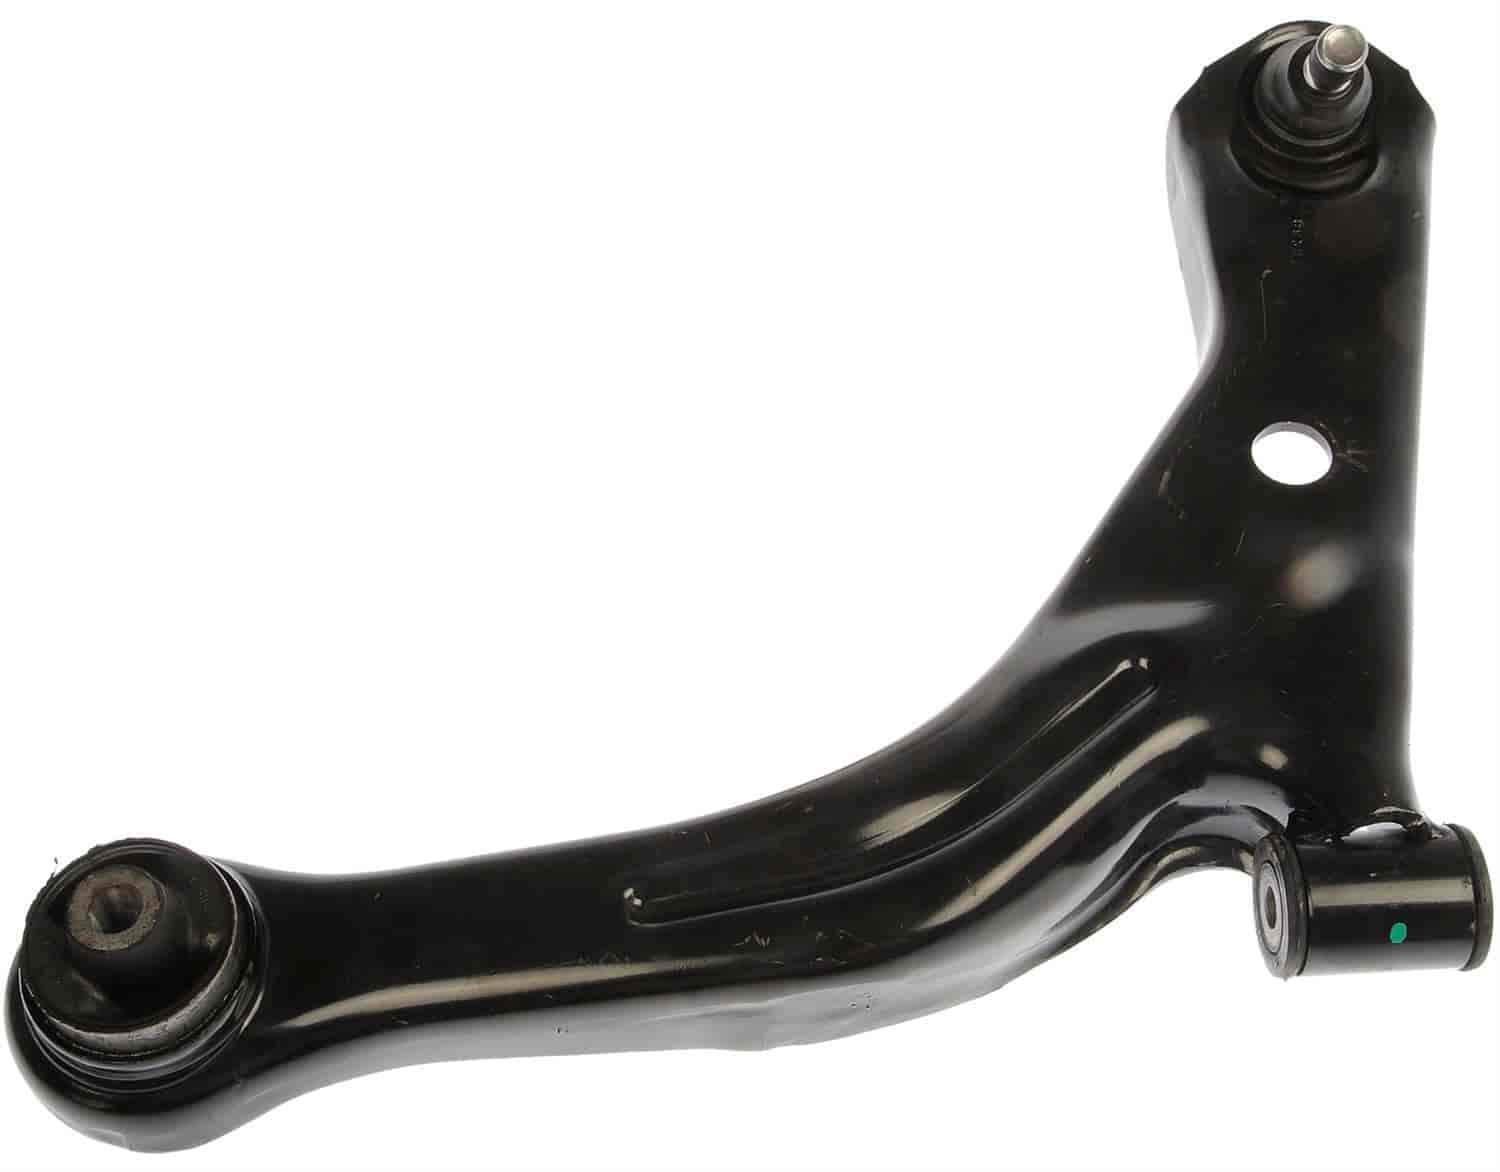 Lower Control Arm 2005-2011 Mazda Tribute, 2005-2011 Mercury Mariner, 2005-2012 Ford Escape - Front Left